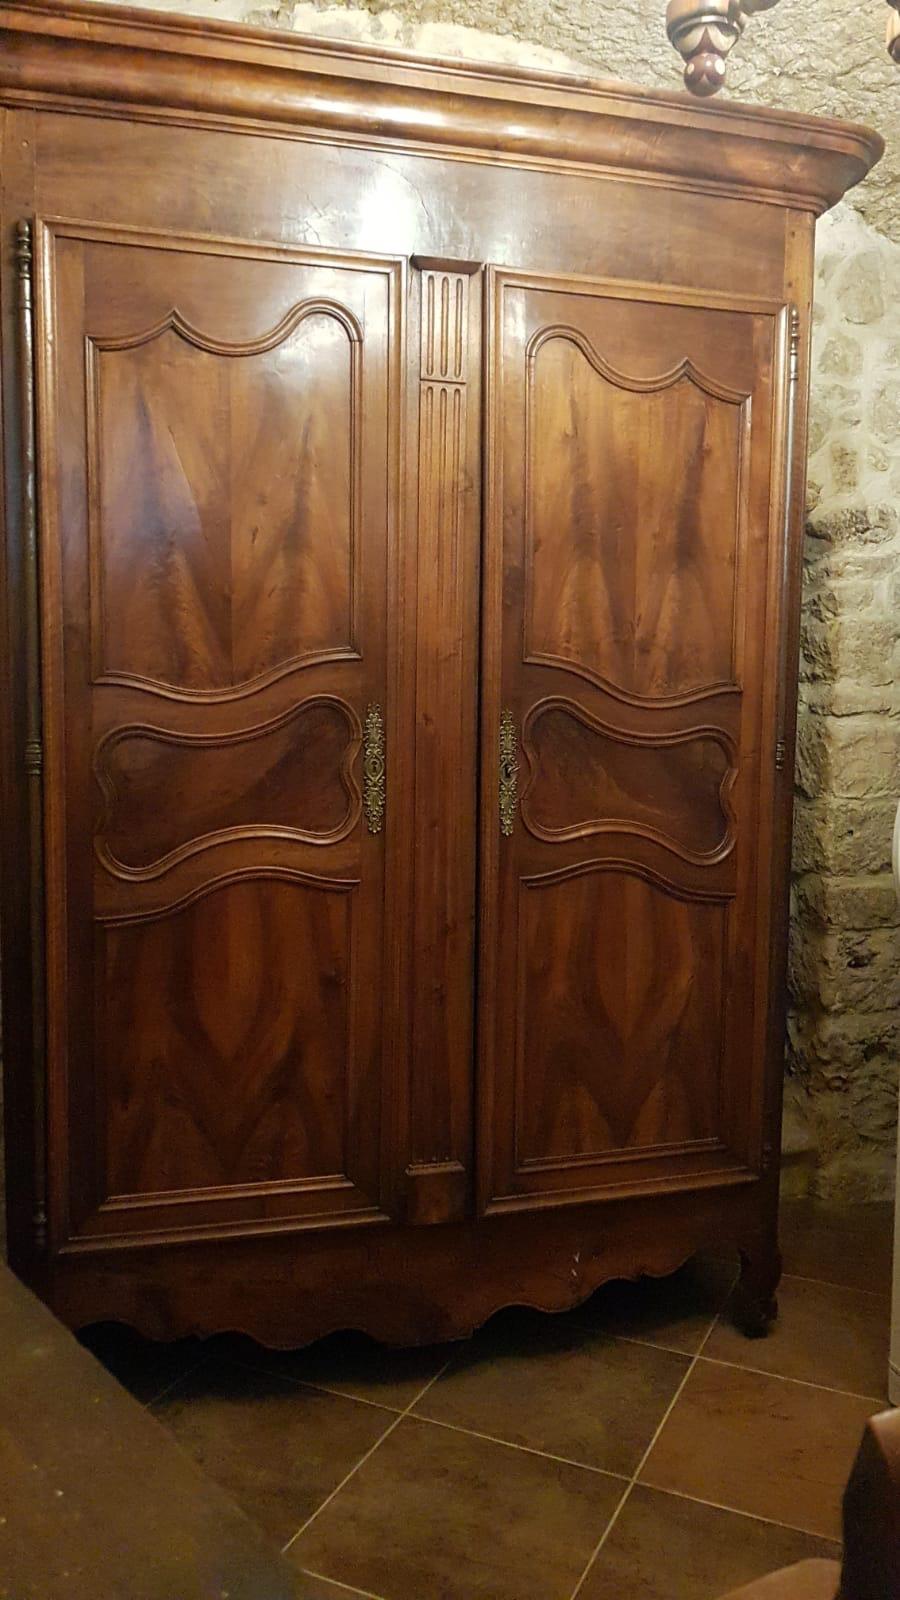 French Provencal closet, walnut wood, 1.60 cm wide at the body, 1.80 at the hat.
Top quality wood, remains well proportioned even though it has huge measures.
Present only one shelf, if the buyer wants will be made the missing shelves at no